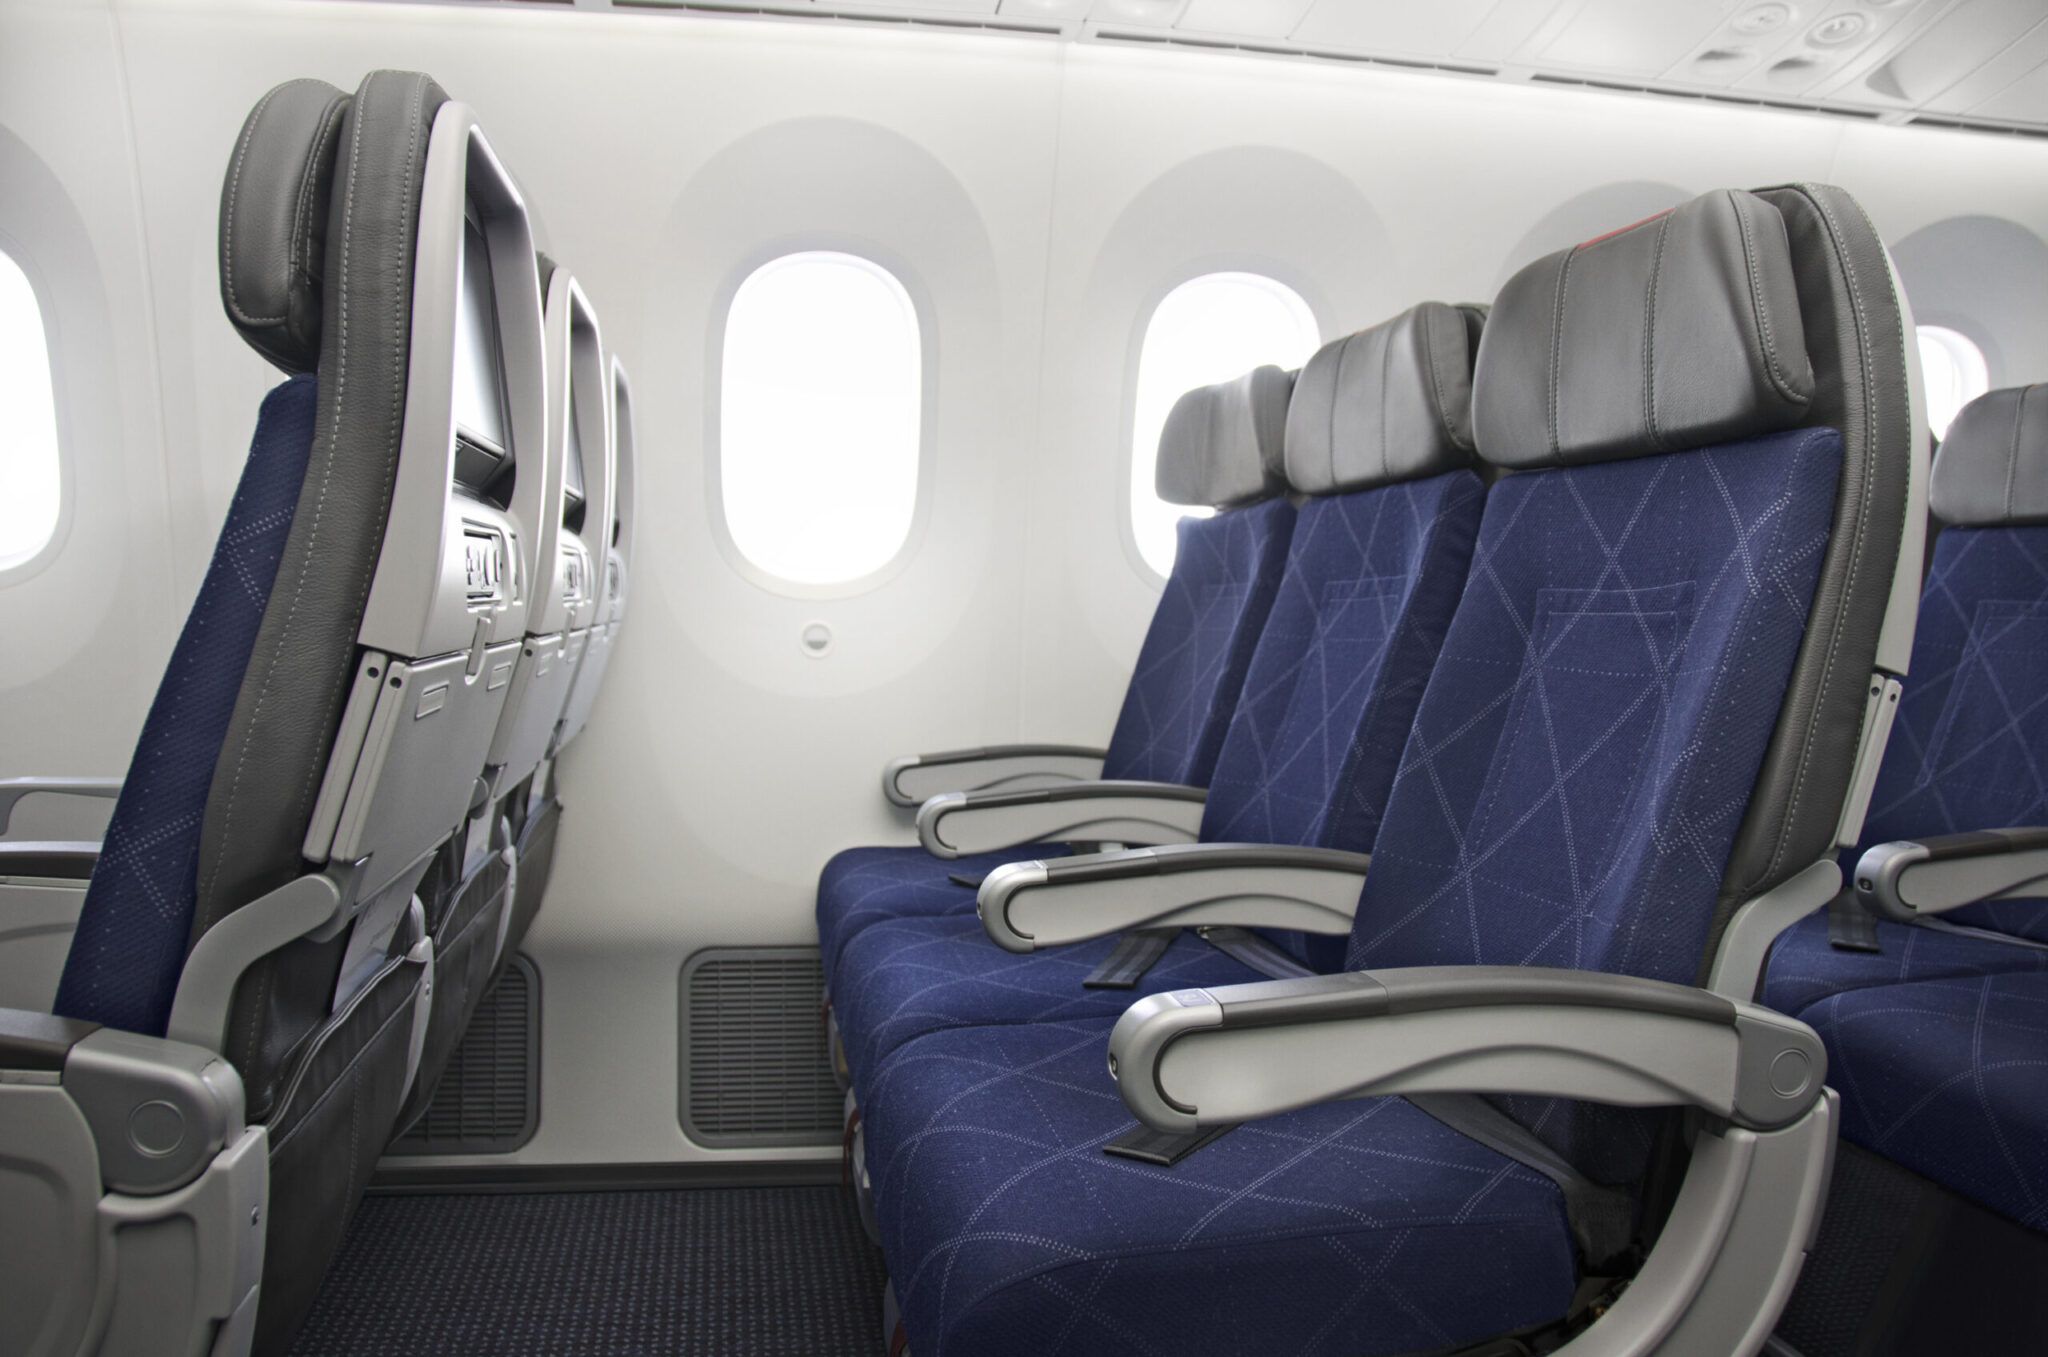 American Airlines economy class